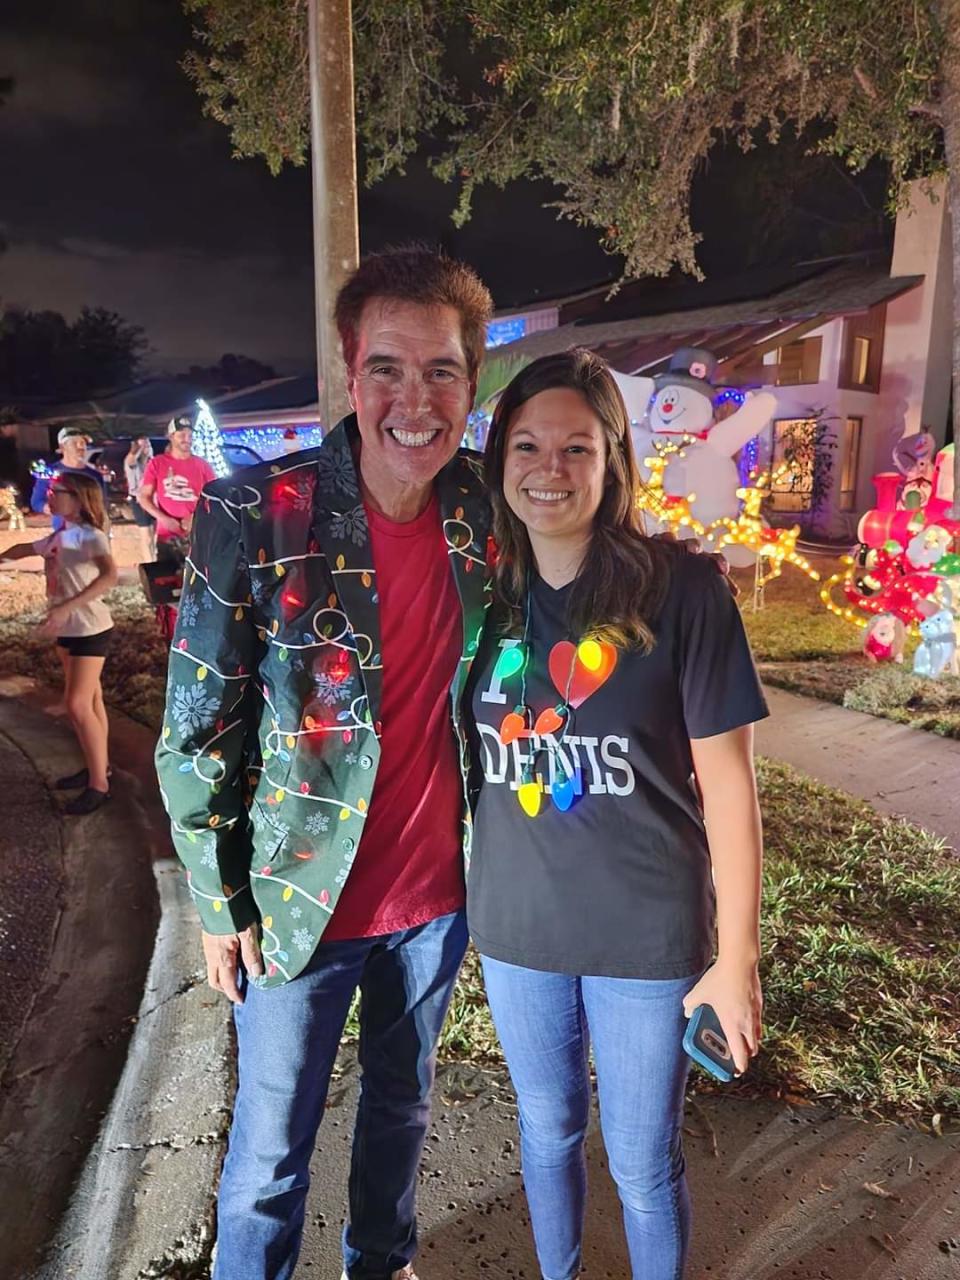 Denis Phillips, a popular TV weatherman in Florida poses for a picture with a fan during his neighborhood's holiday festivities. 